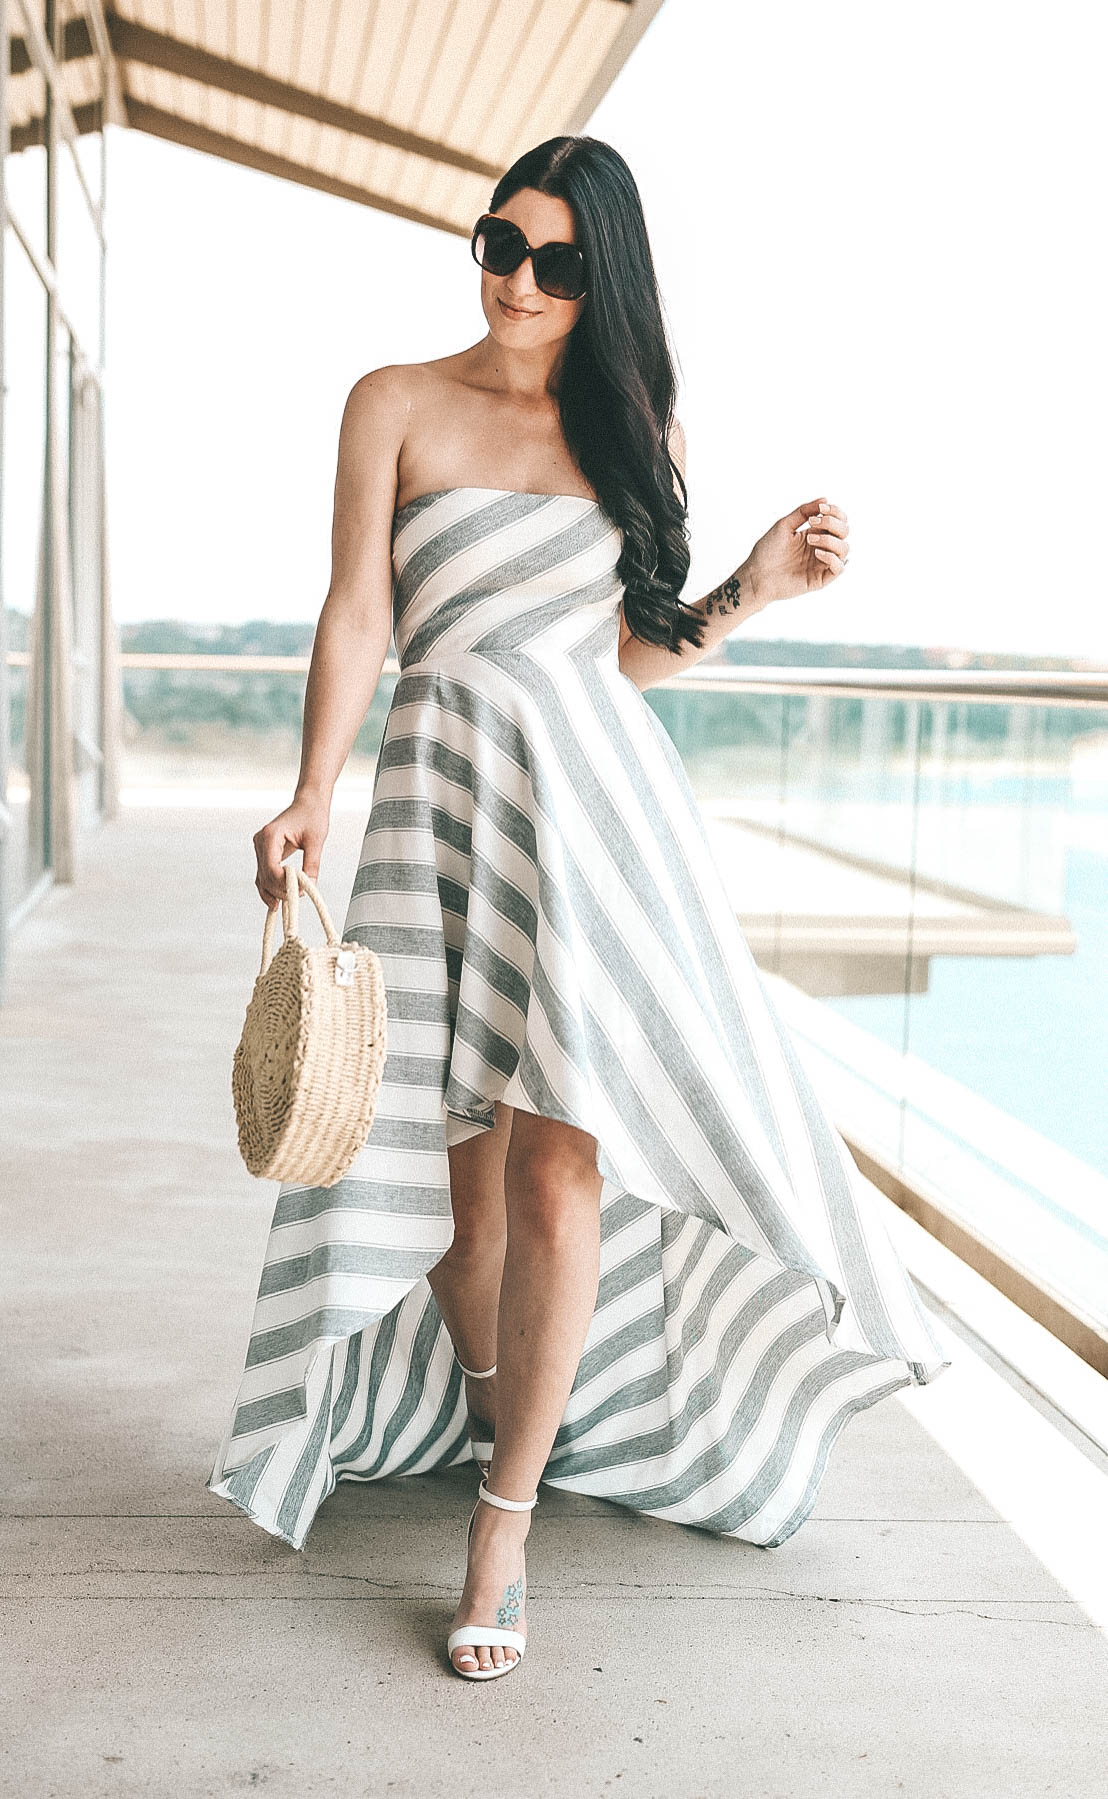 DTKAustin shares an affordable lace up maxi dress perfect for summer. Dress is AKIRA, bag is Clare V, shoes Steve Madden. | summer dresses for women | summer style | summer fashion | summer outfits for women | how to style a lace up dress || Dressed to Kill #fashion #style #womensoutfit #laceupdress #summerdress #summerfashion #summerstyle #dtkaustin - {The Lace-Up Dress of Your Dreams} featured by popular Austin fashion blogger, Dressed to Kill